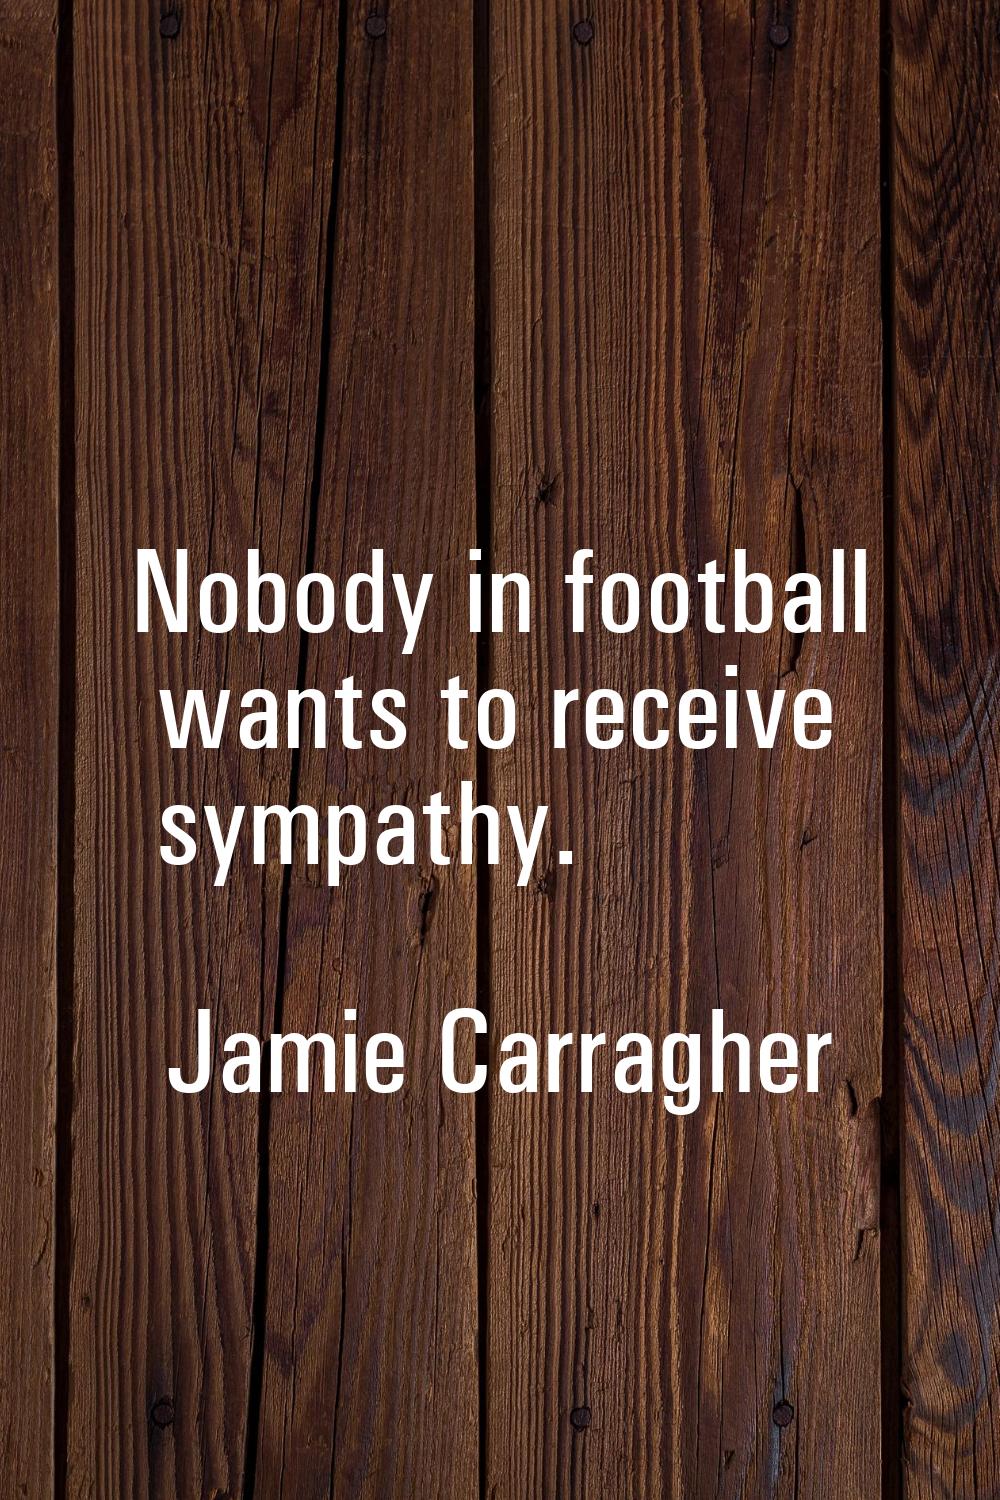 Nobody in football wants to receive sympathy.